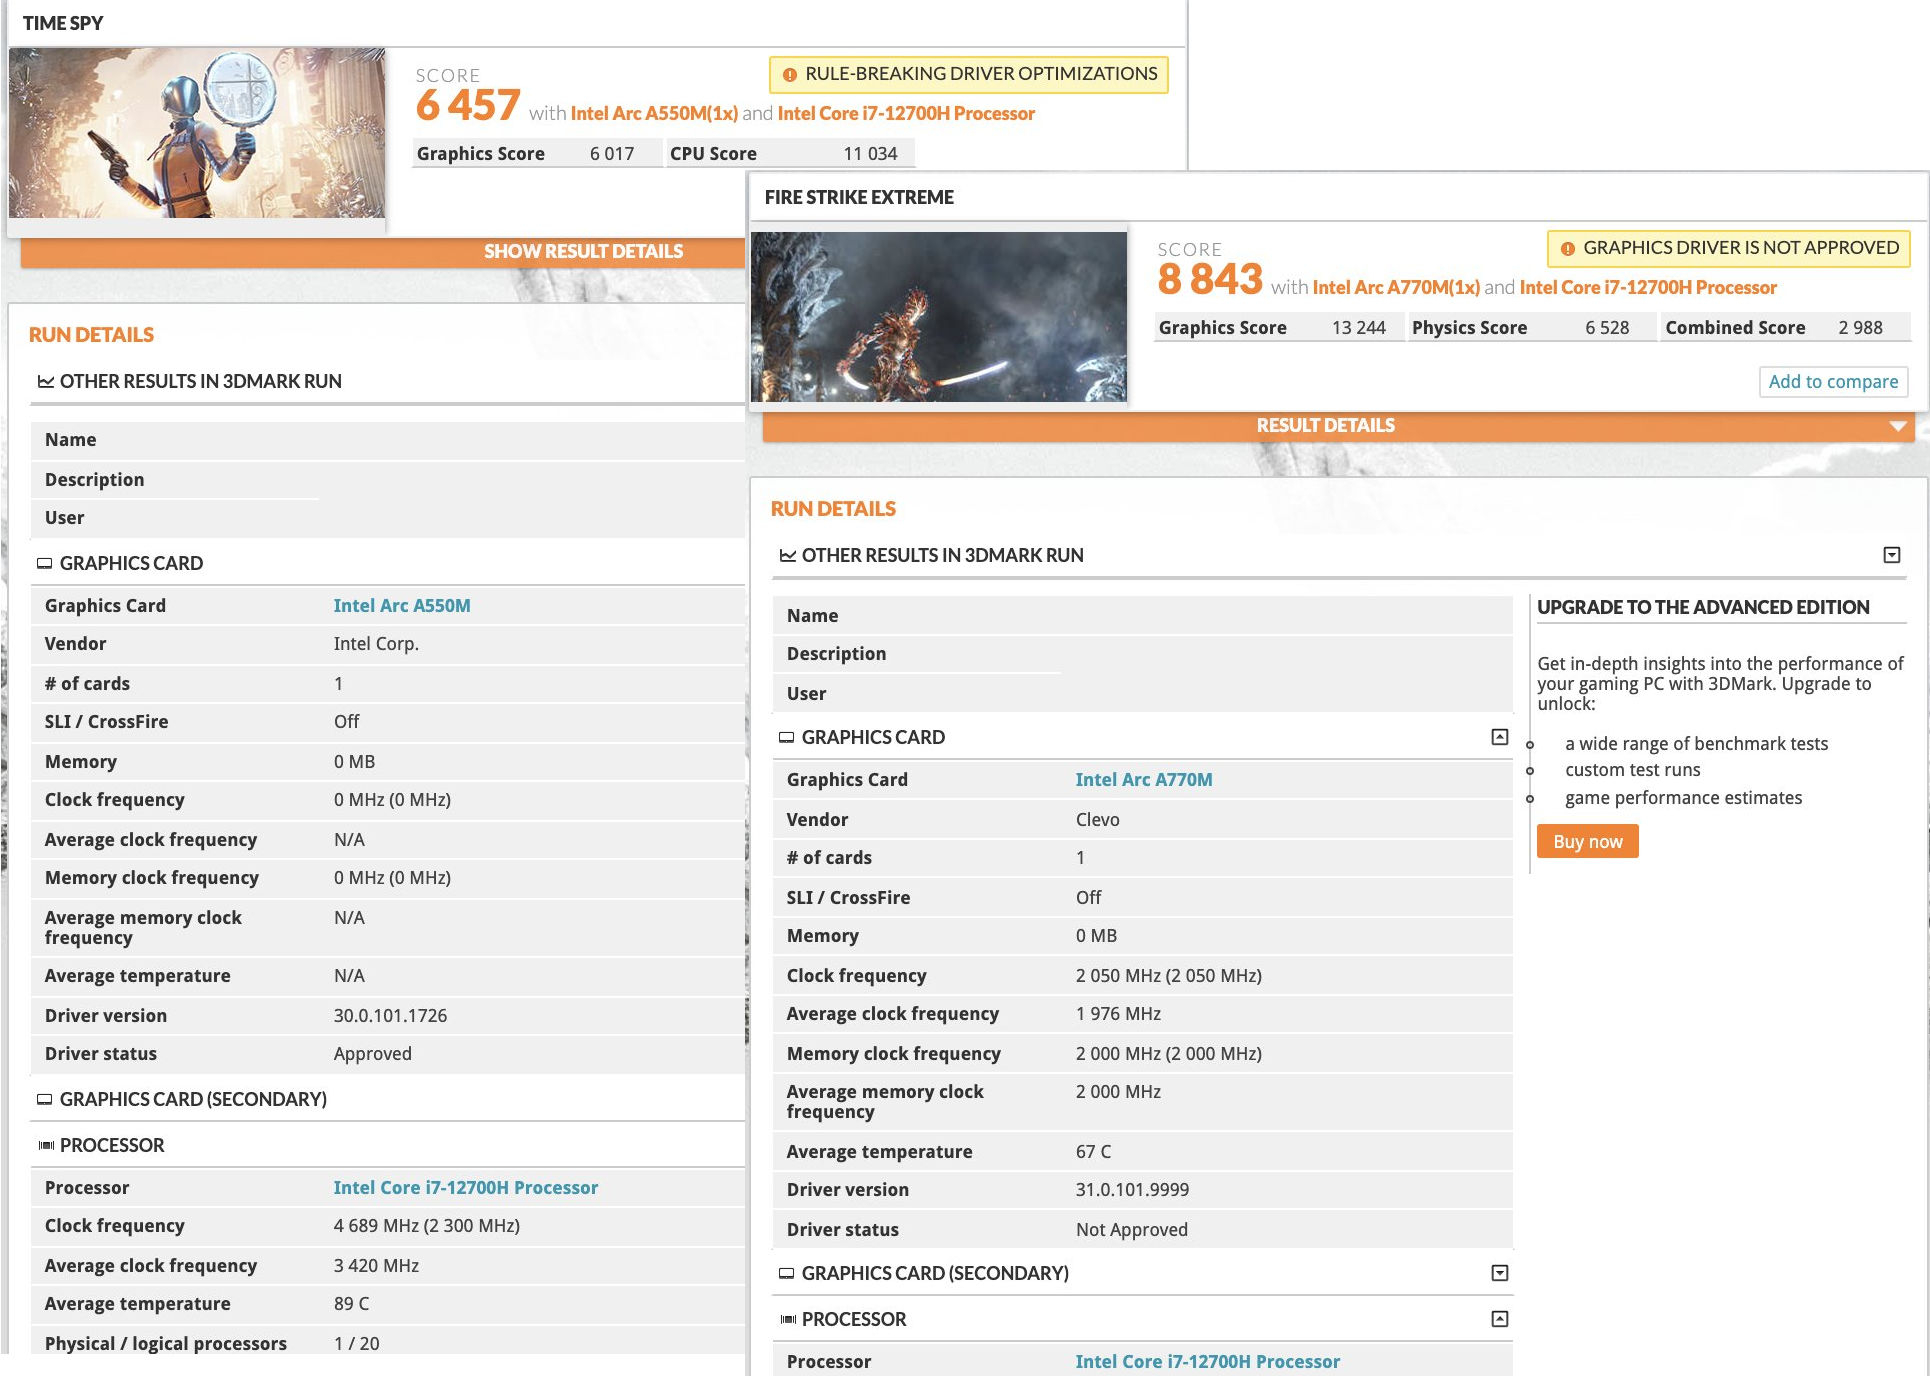 Intel Arc A770M and A550M mobile graphics cards made their first mark in 3DMark test - the senior showed RTX 3070 level